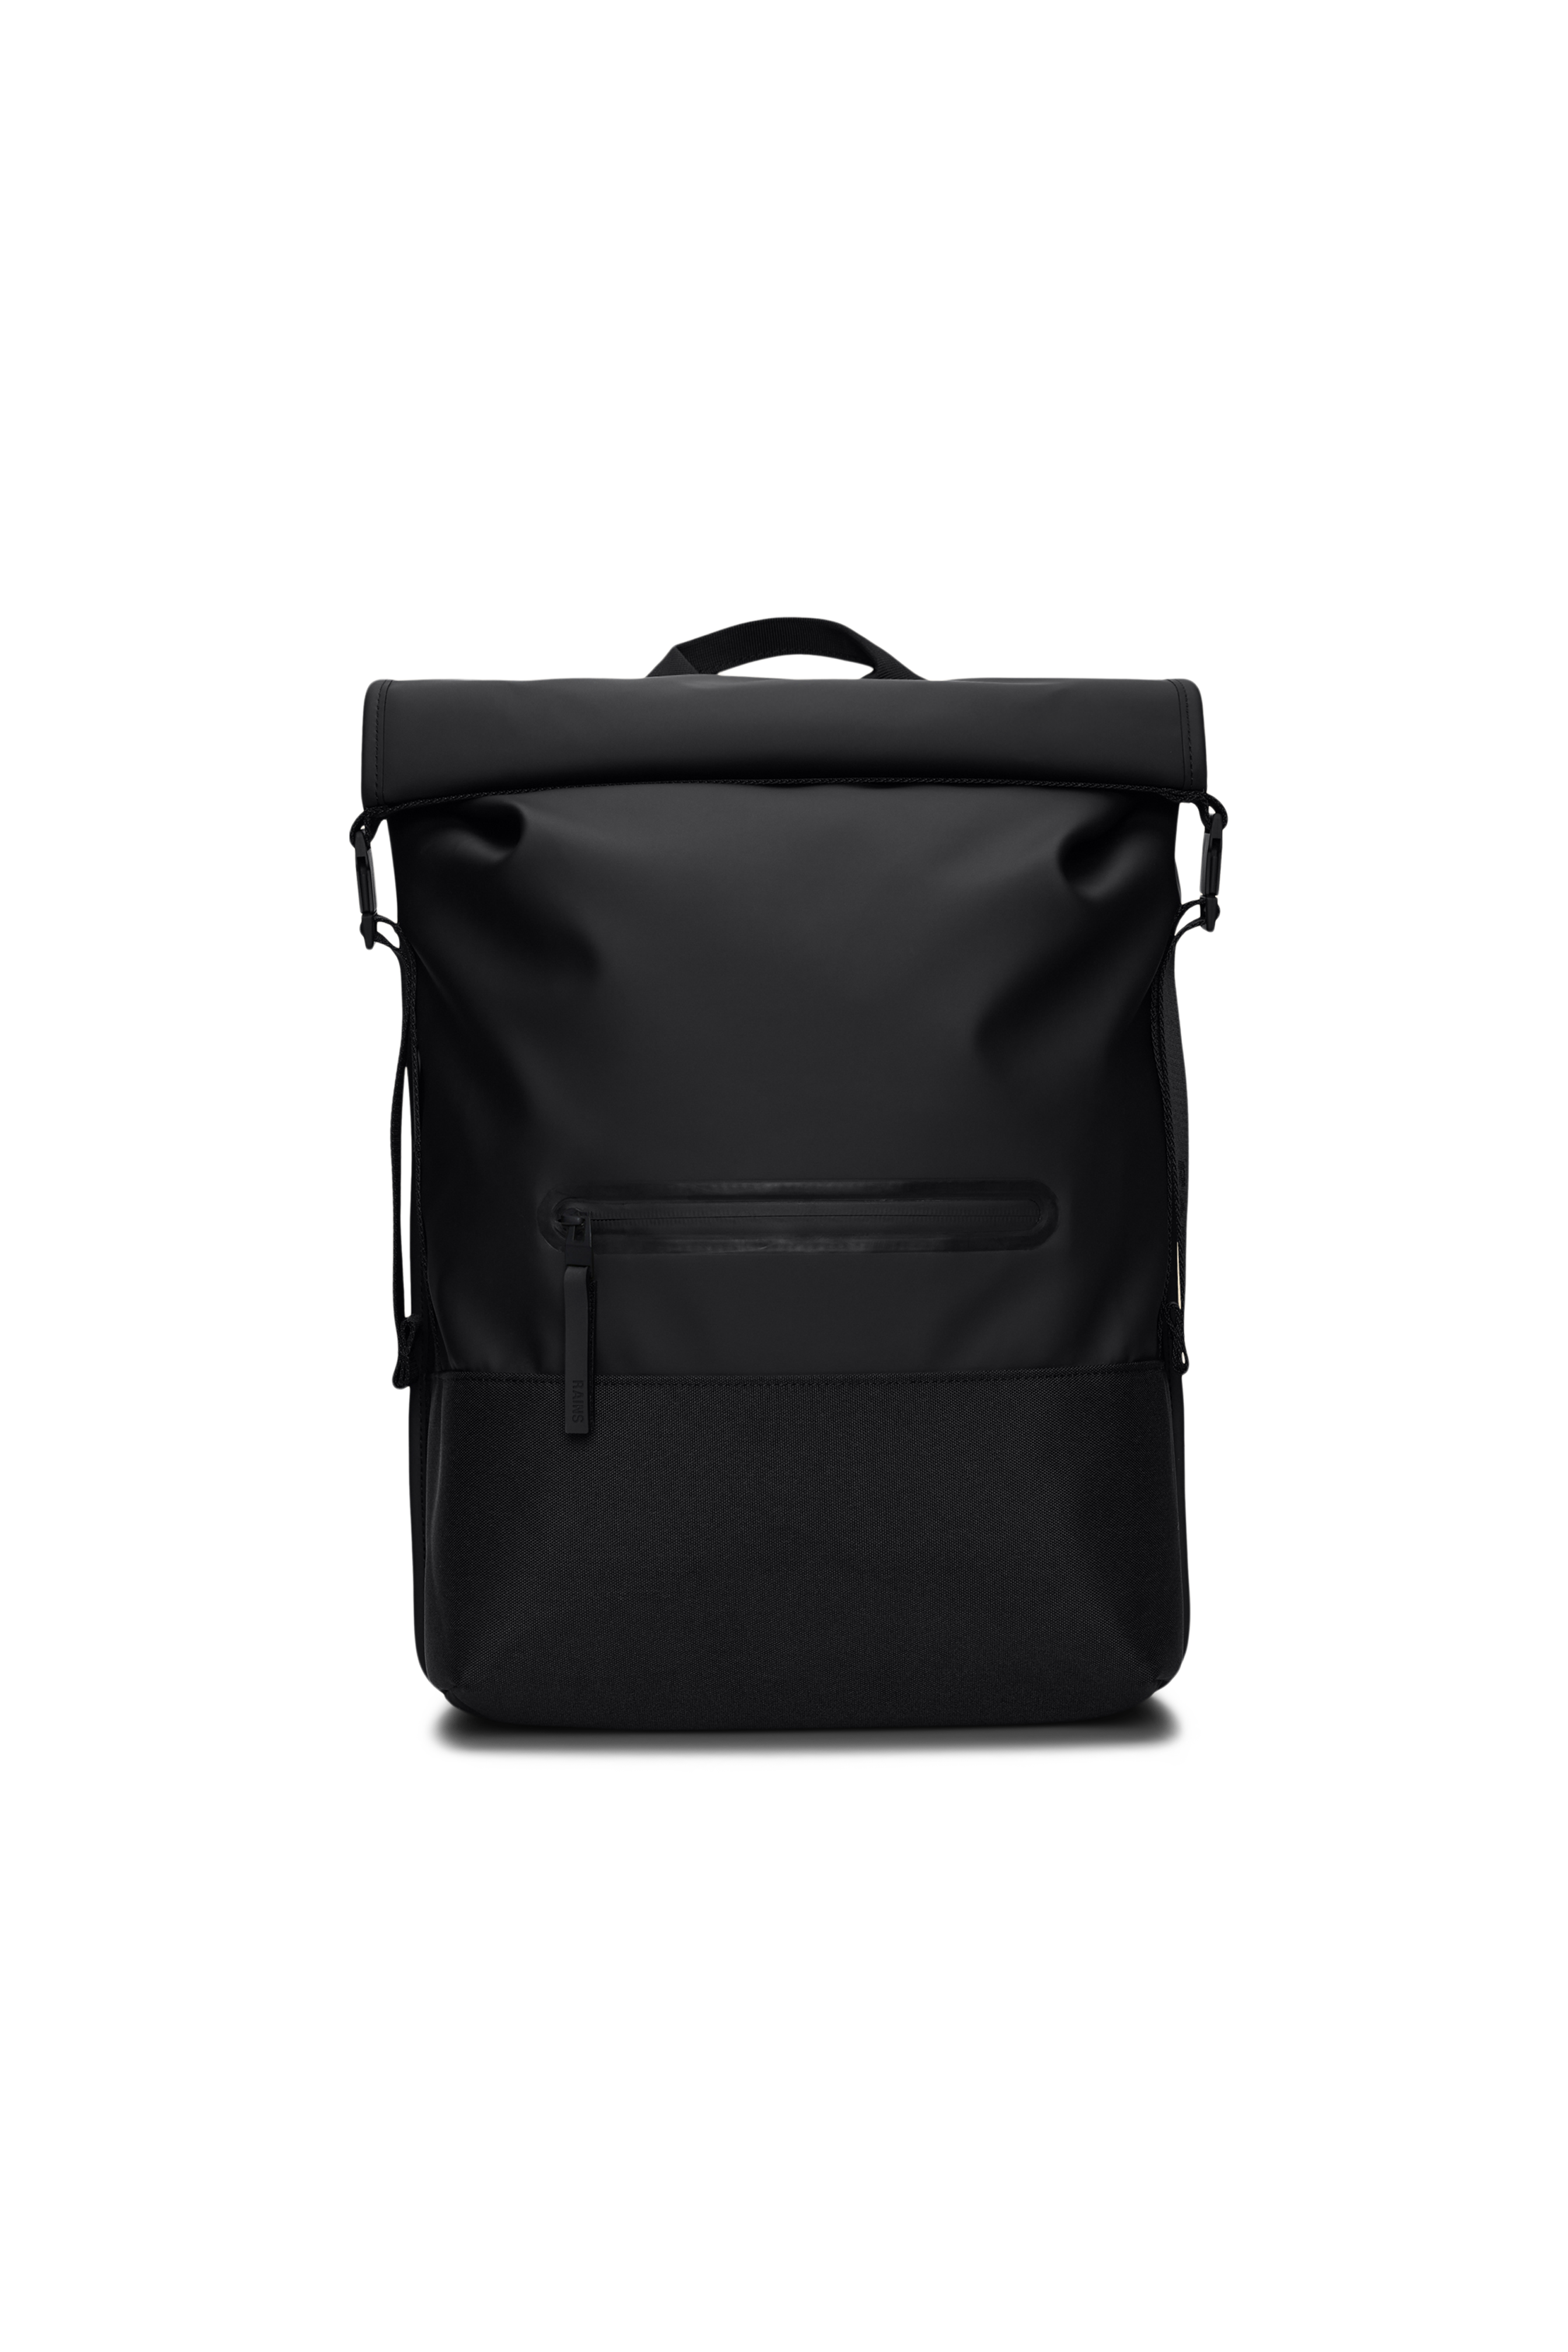 Rains® Trail Rolltop Backpack in Black for £115 | Free Shipping